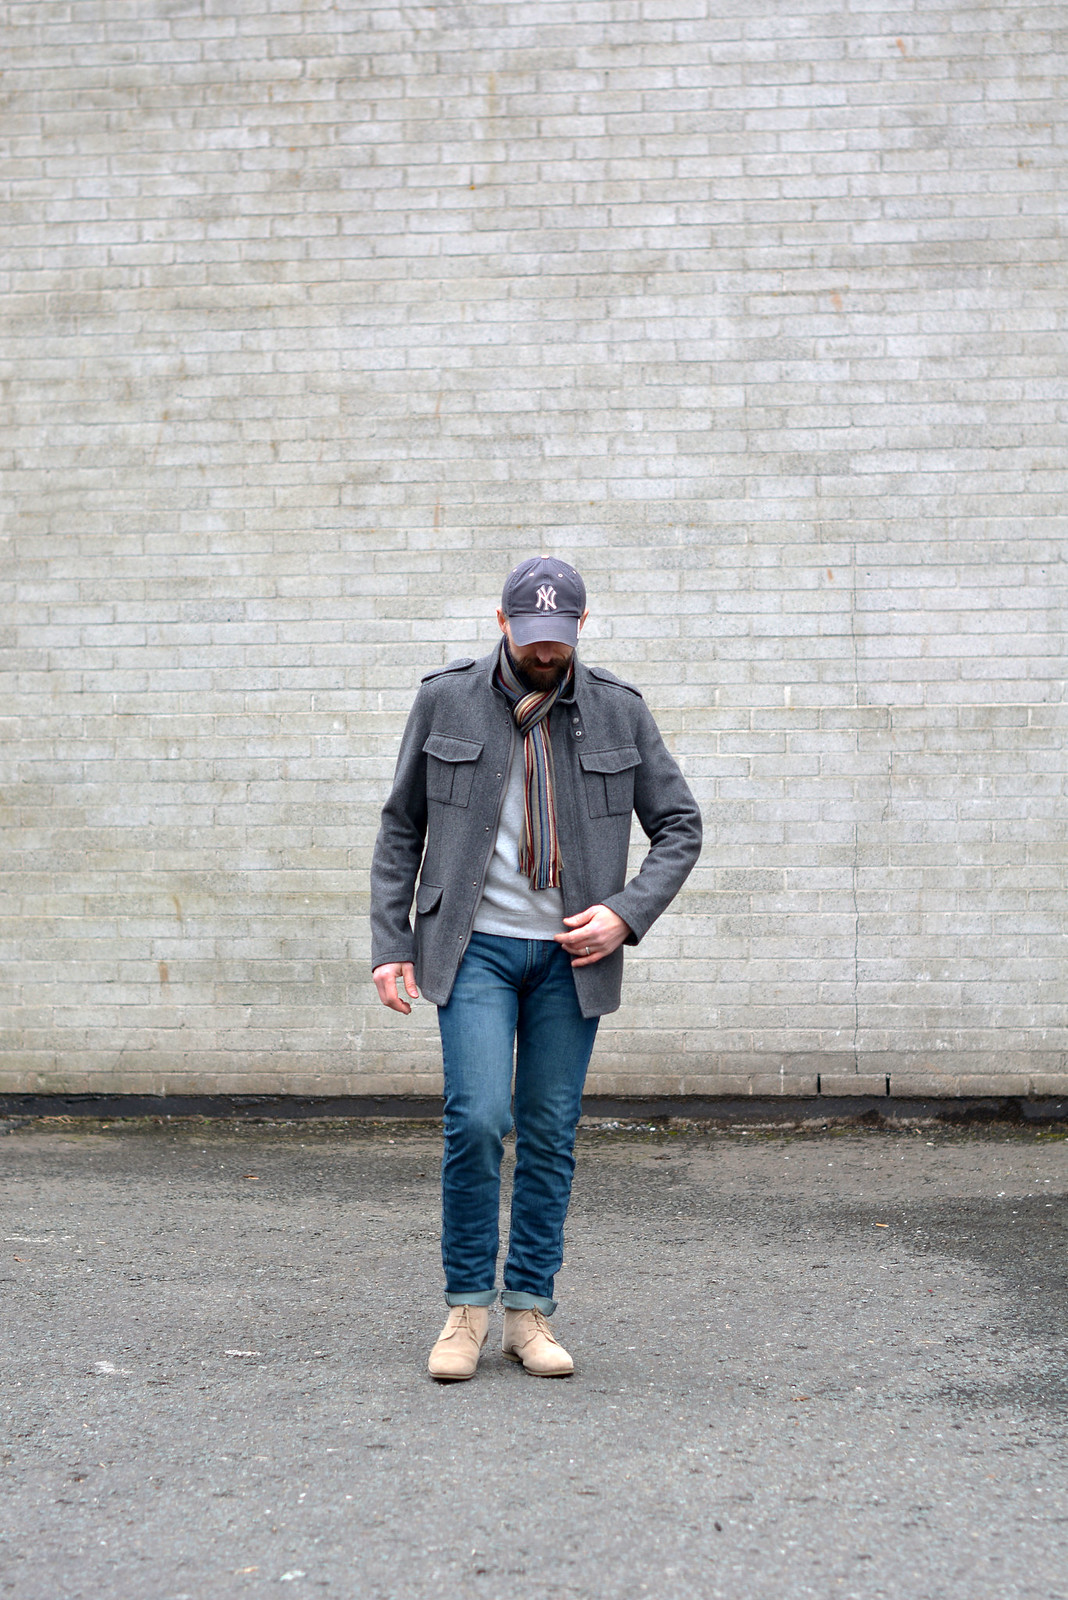 How to wear not-too-skinny skinny jeans: Grey wool jacket \ baseball cap \ striped scarf \ desert boots | Silver Londoner, over 40 menswear